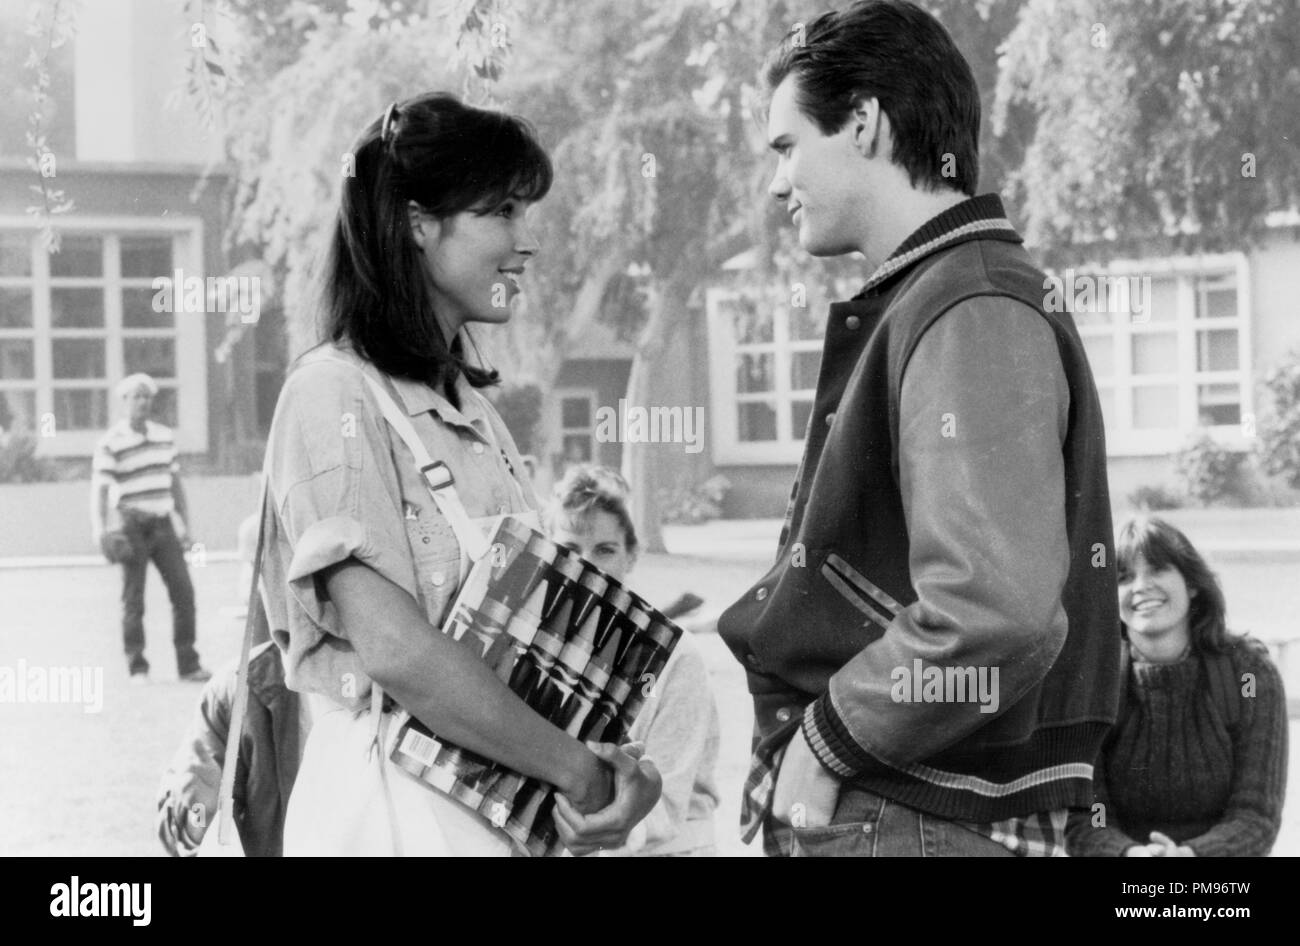 Studio Publicity Still from 'Once Bitten' Karen Kopins, Jim Carrey © 1985 Samuel Goldwyn All Rights Reserved   File Reference # 31703202THA  For Editorial Use Only Stock Photo